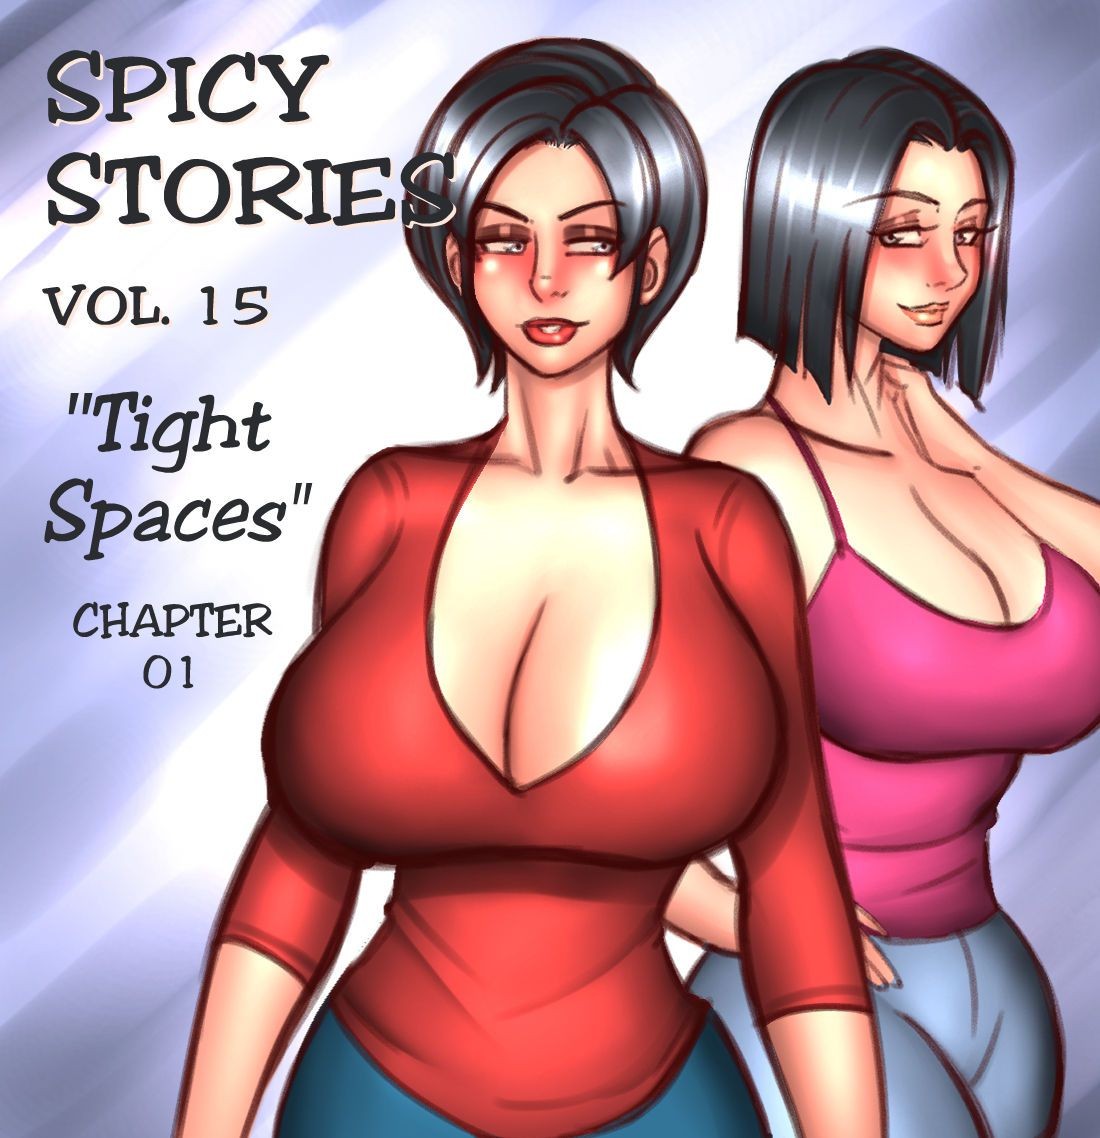 Masturbation NGT Spicy Stories 15 - Tight Spaces (Ongoing) NGT Spicy Stories 15 - Tight Spaces (Ongoing) Latinas